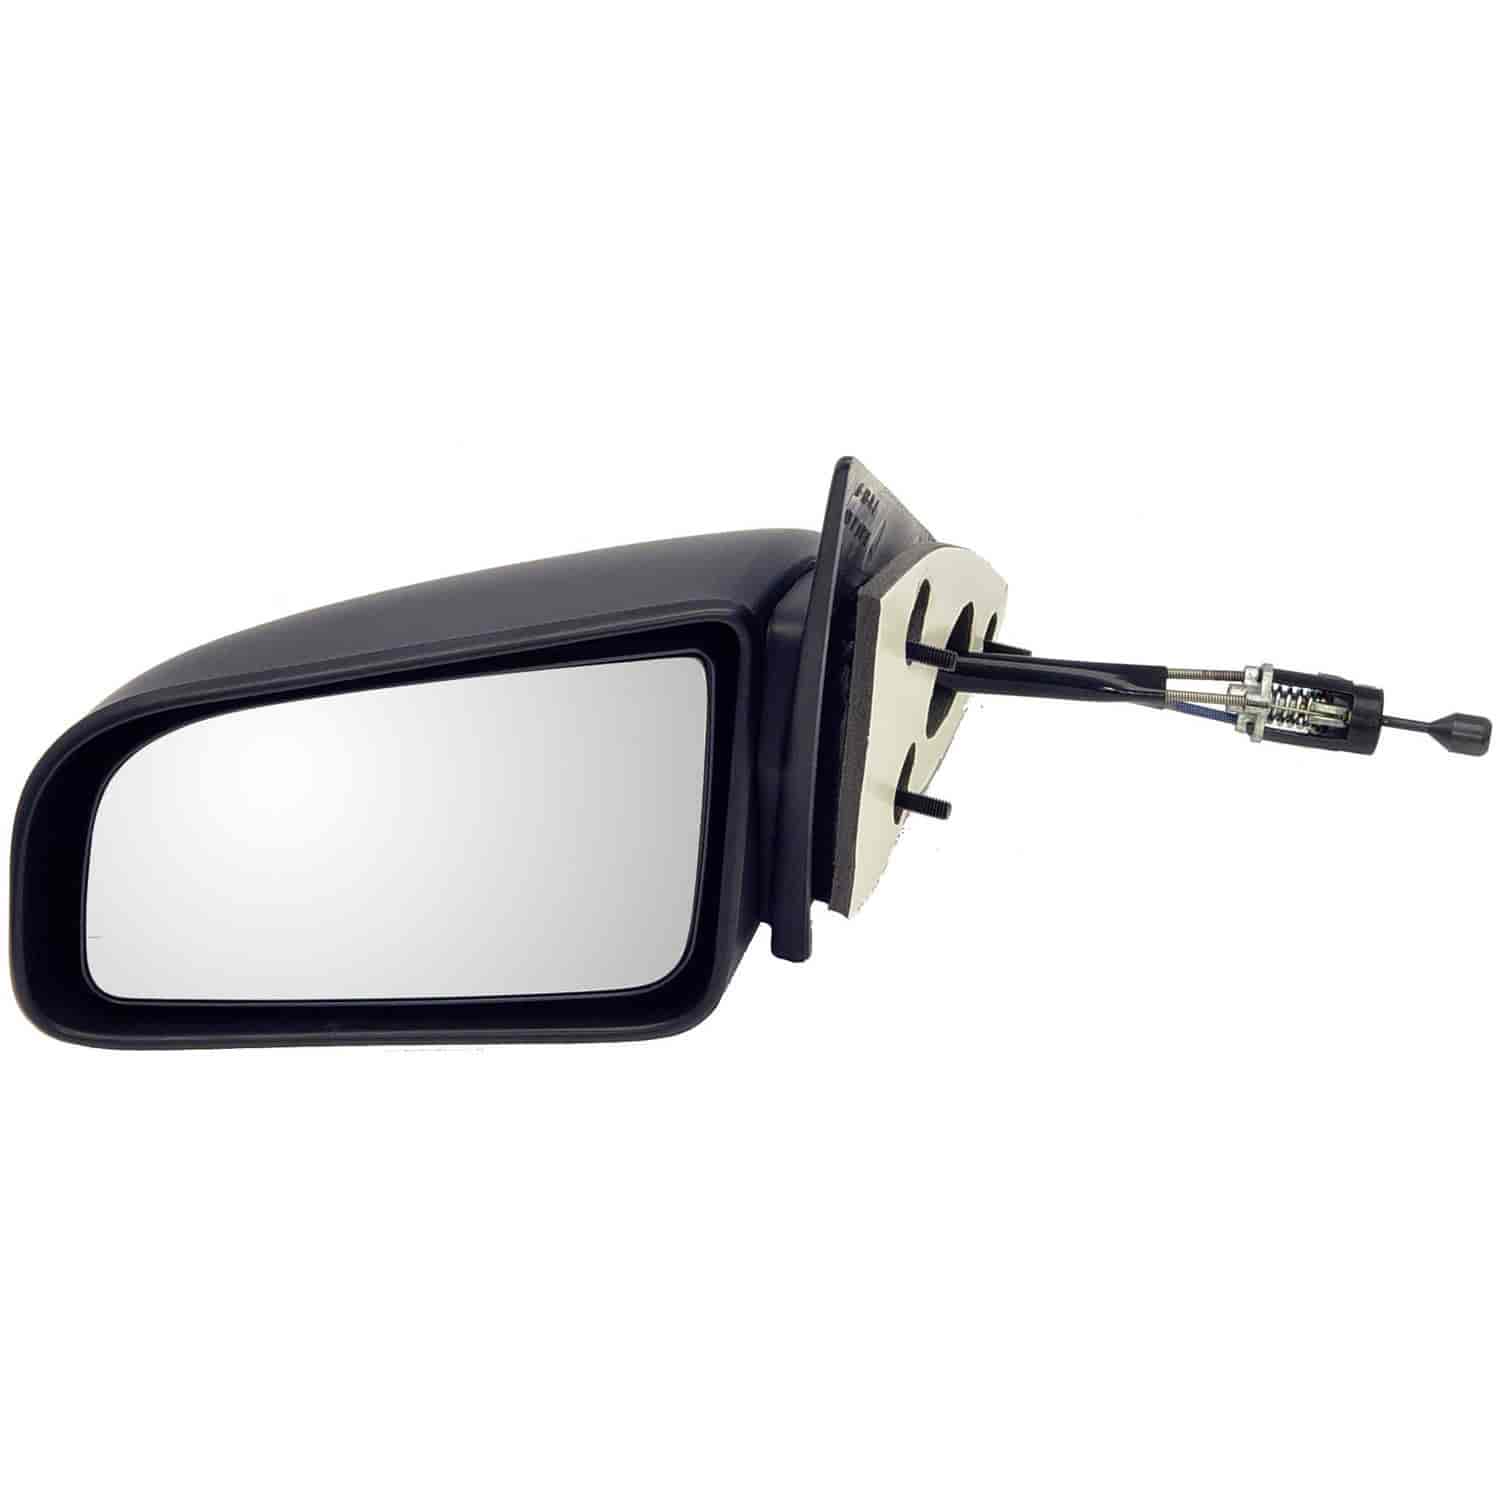 Side View Mirror Manual Remote